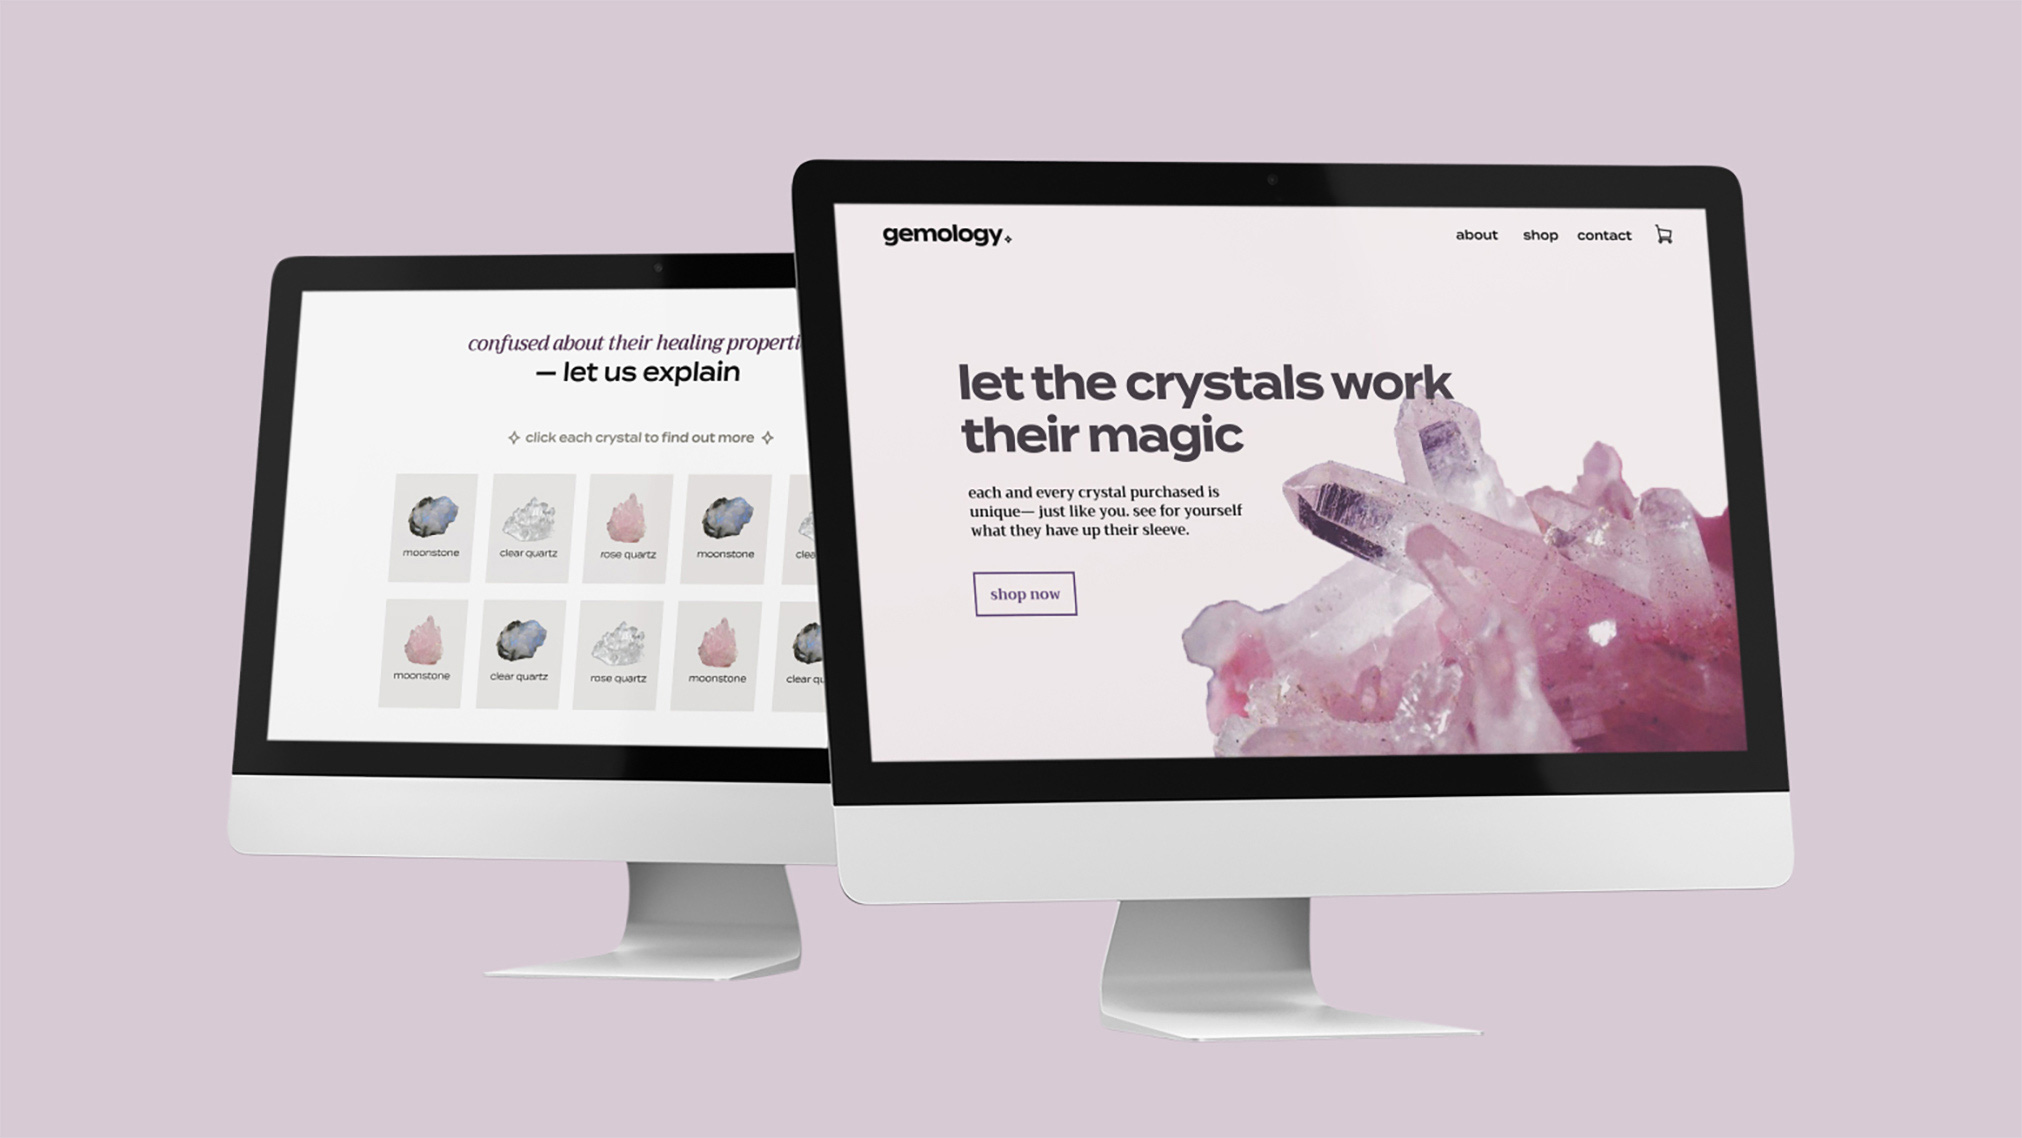 Unlike any other brand on the market, Gemology brings luxury to a product that has been used for centuries. Gemology is a mockup e-commerce company, selling an assortment of gems and healing crystals.
